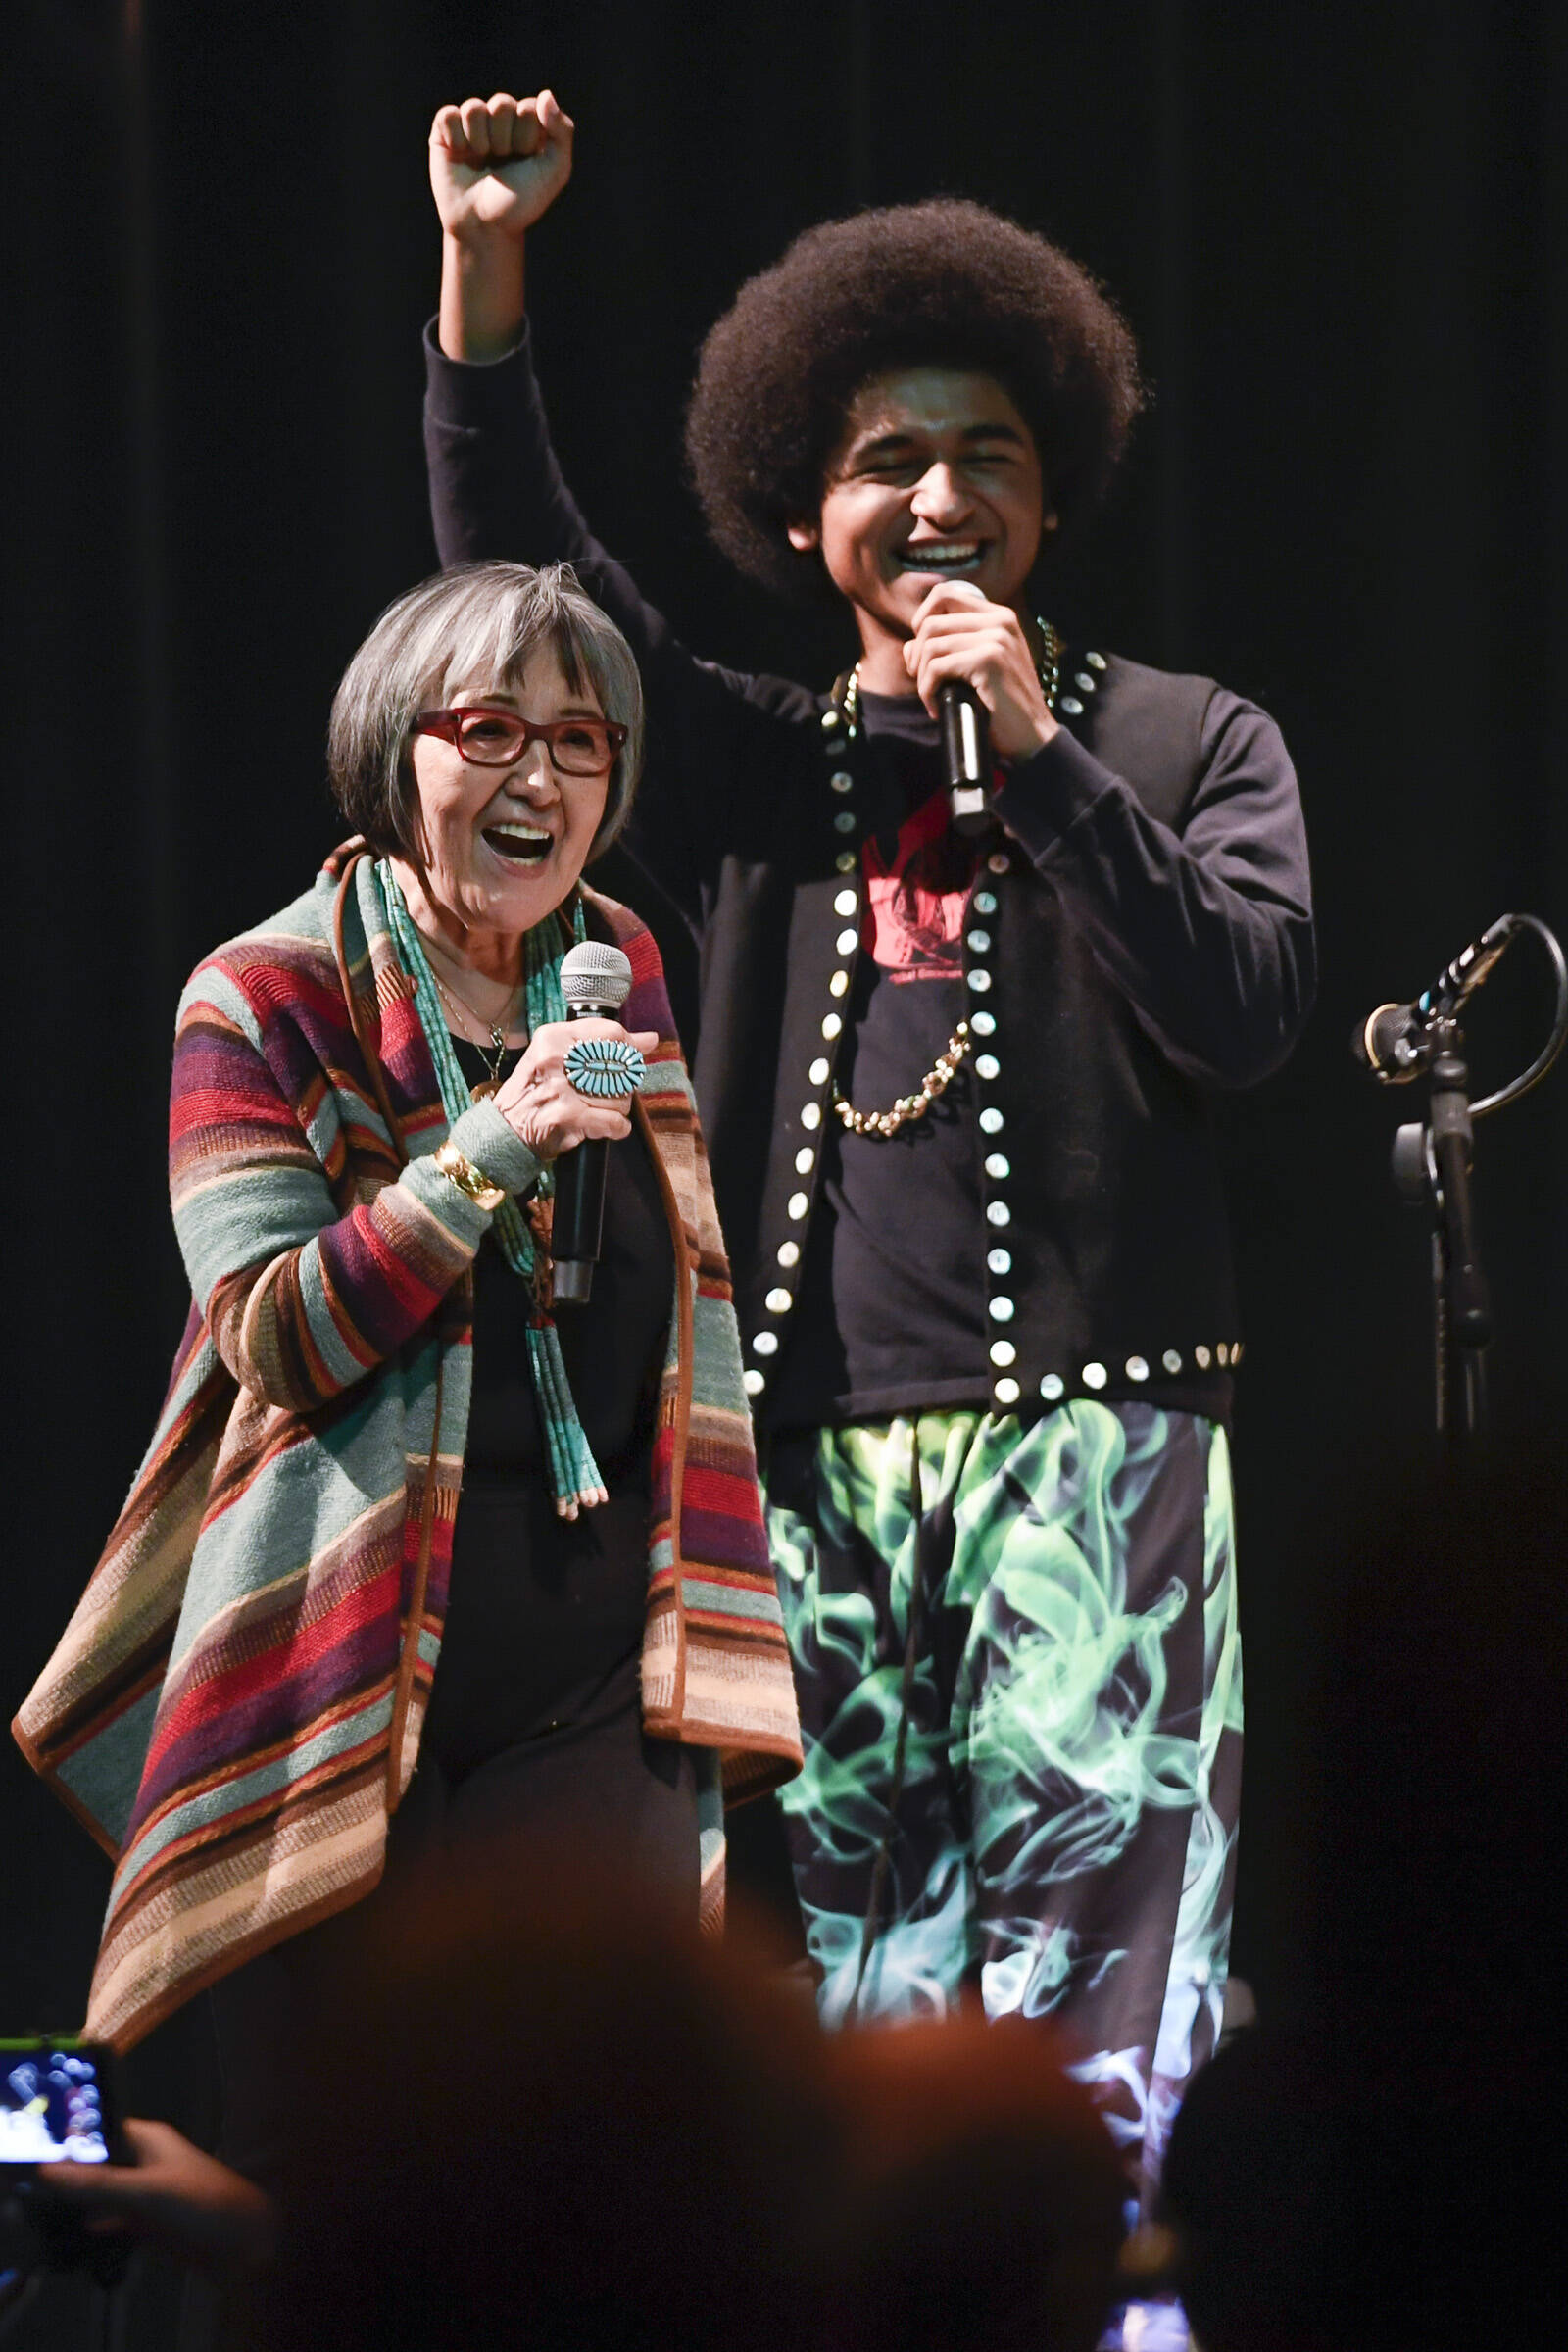 Rosita Worl, president of the Sealaska Heritage Institute, celebrates the performance of hip-hop duo of Arias “A.J.” Hoyle, right, and Chris Talley as an opening act before Khu.eex’ performance at Centennial Hall on Monday, Jan. 28, 2019. (Michael Penn / Juneau Empire File)